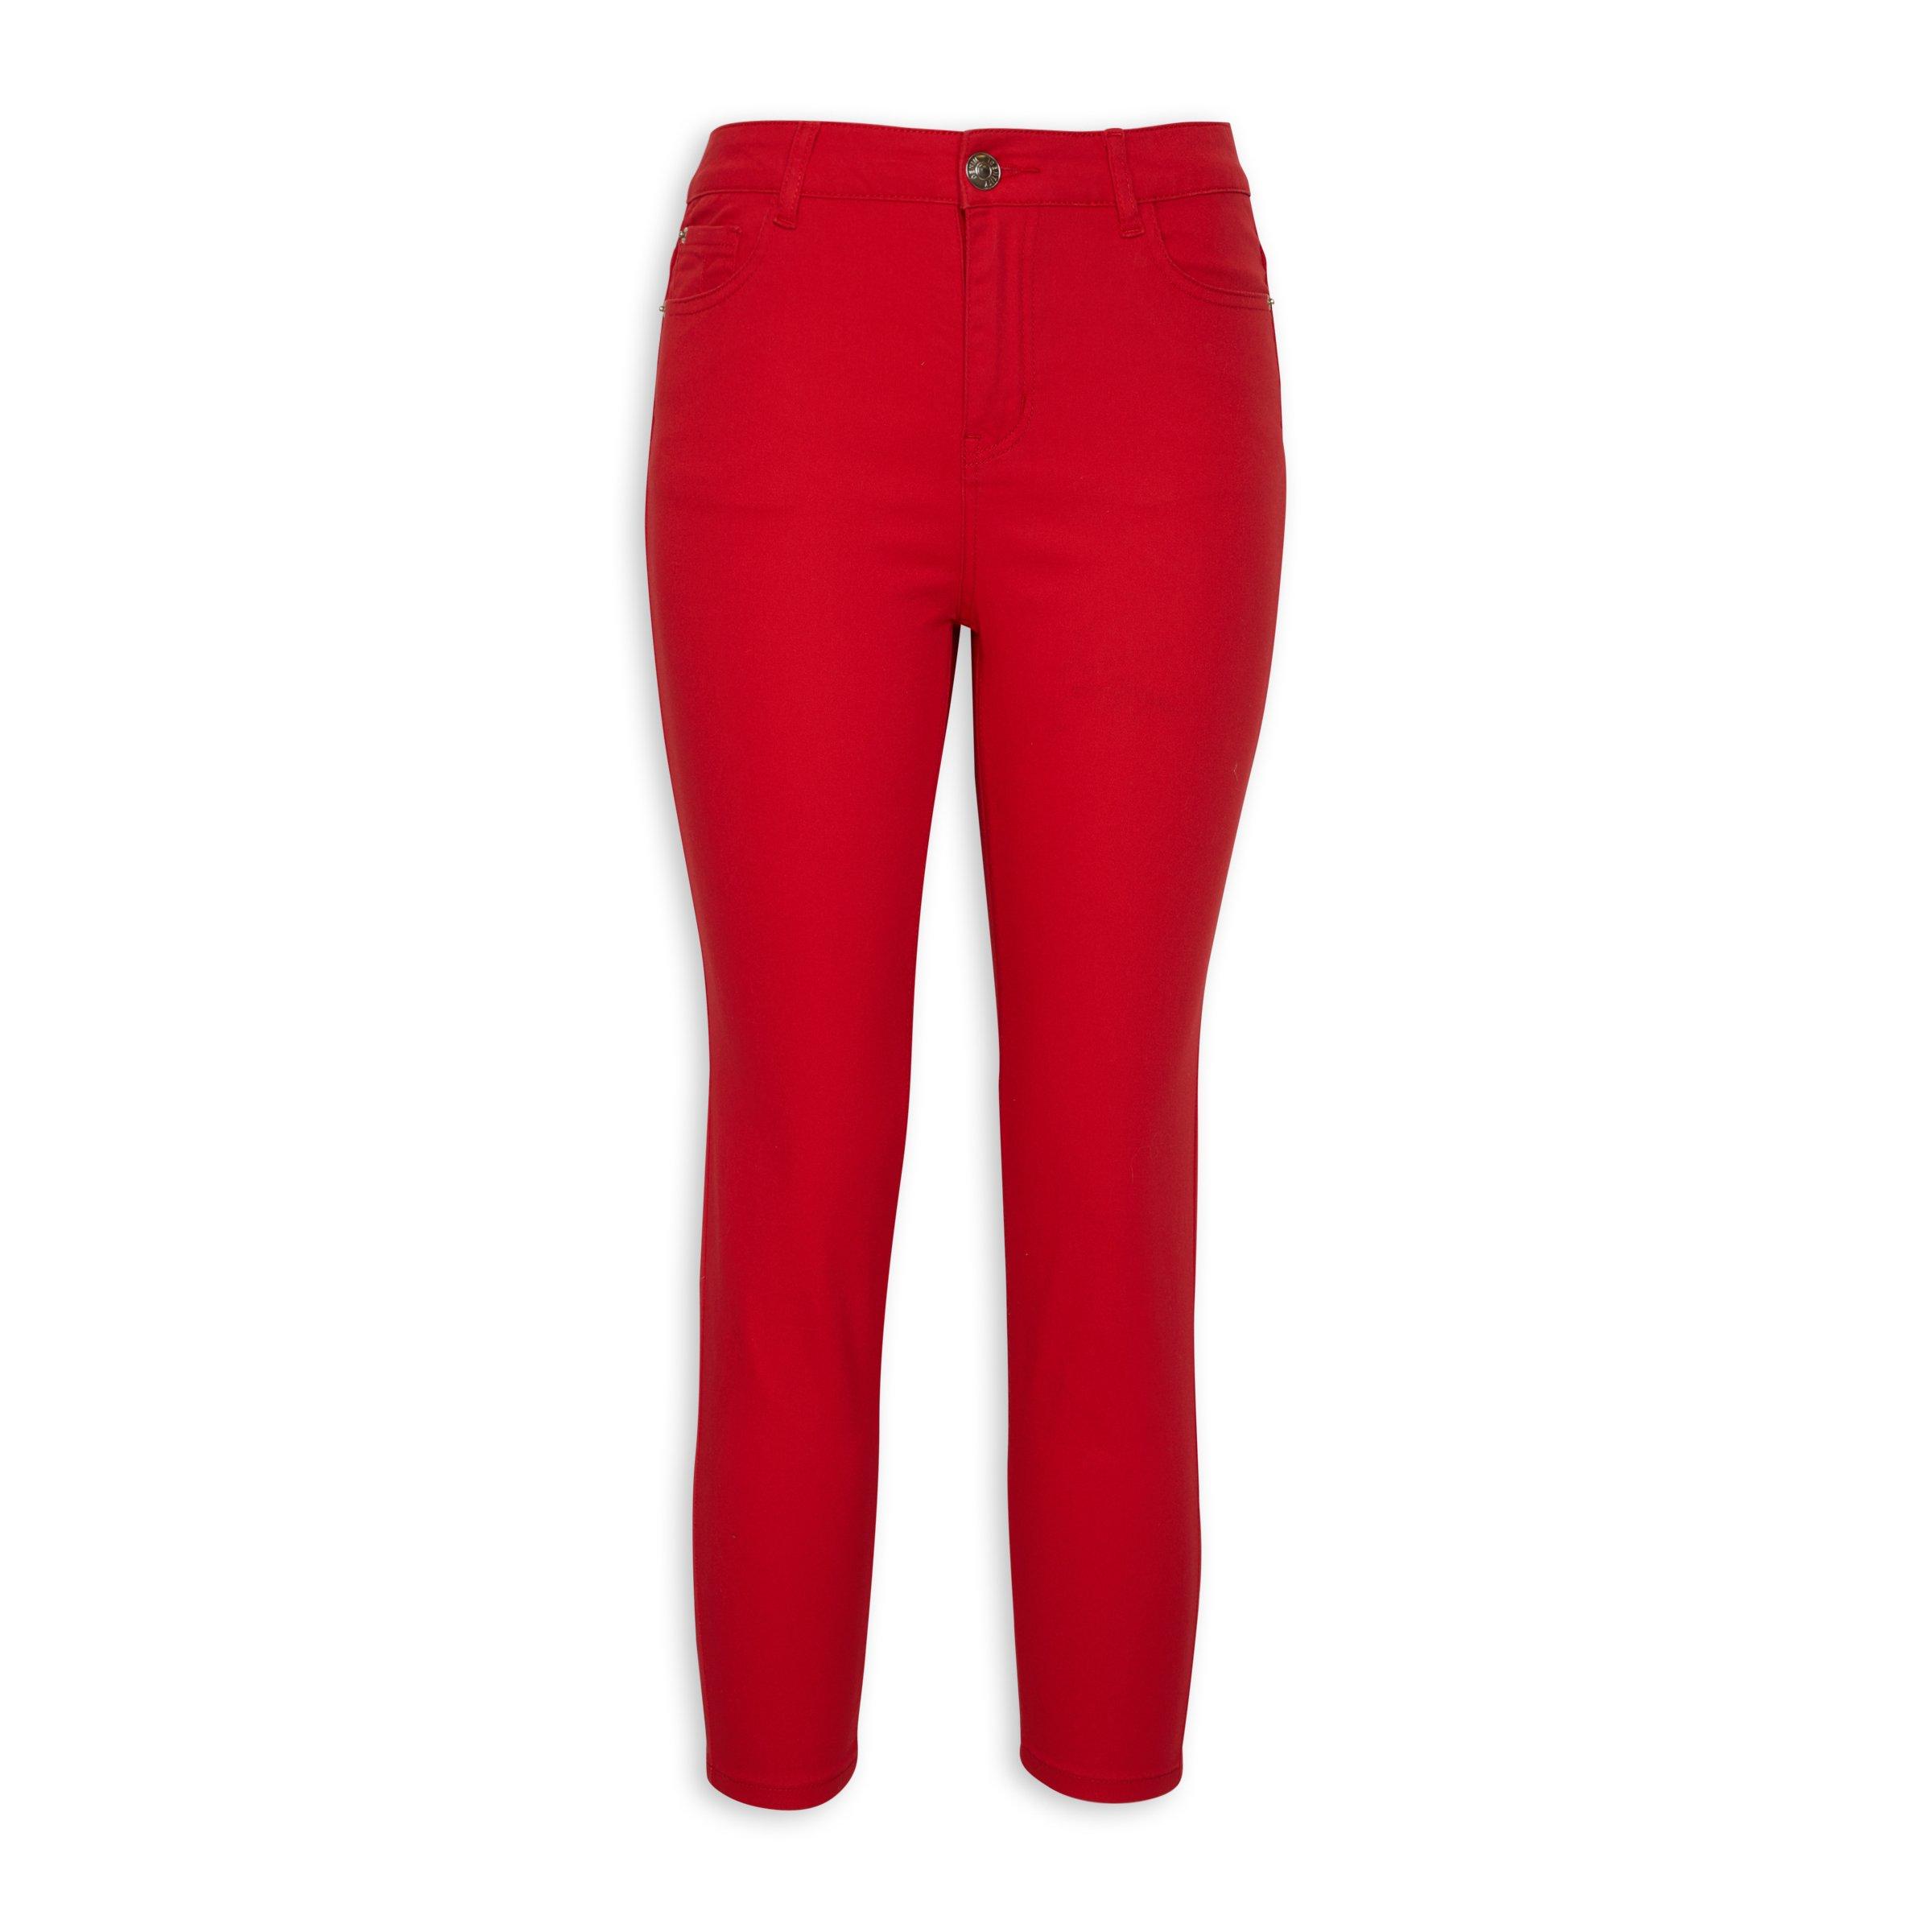 Red Skinny Jeans